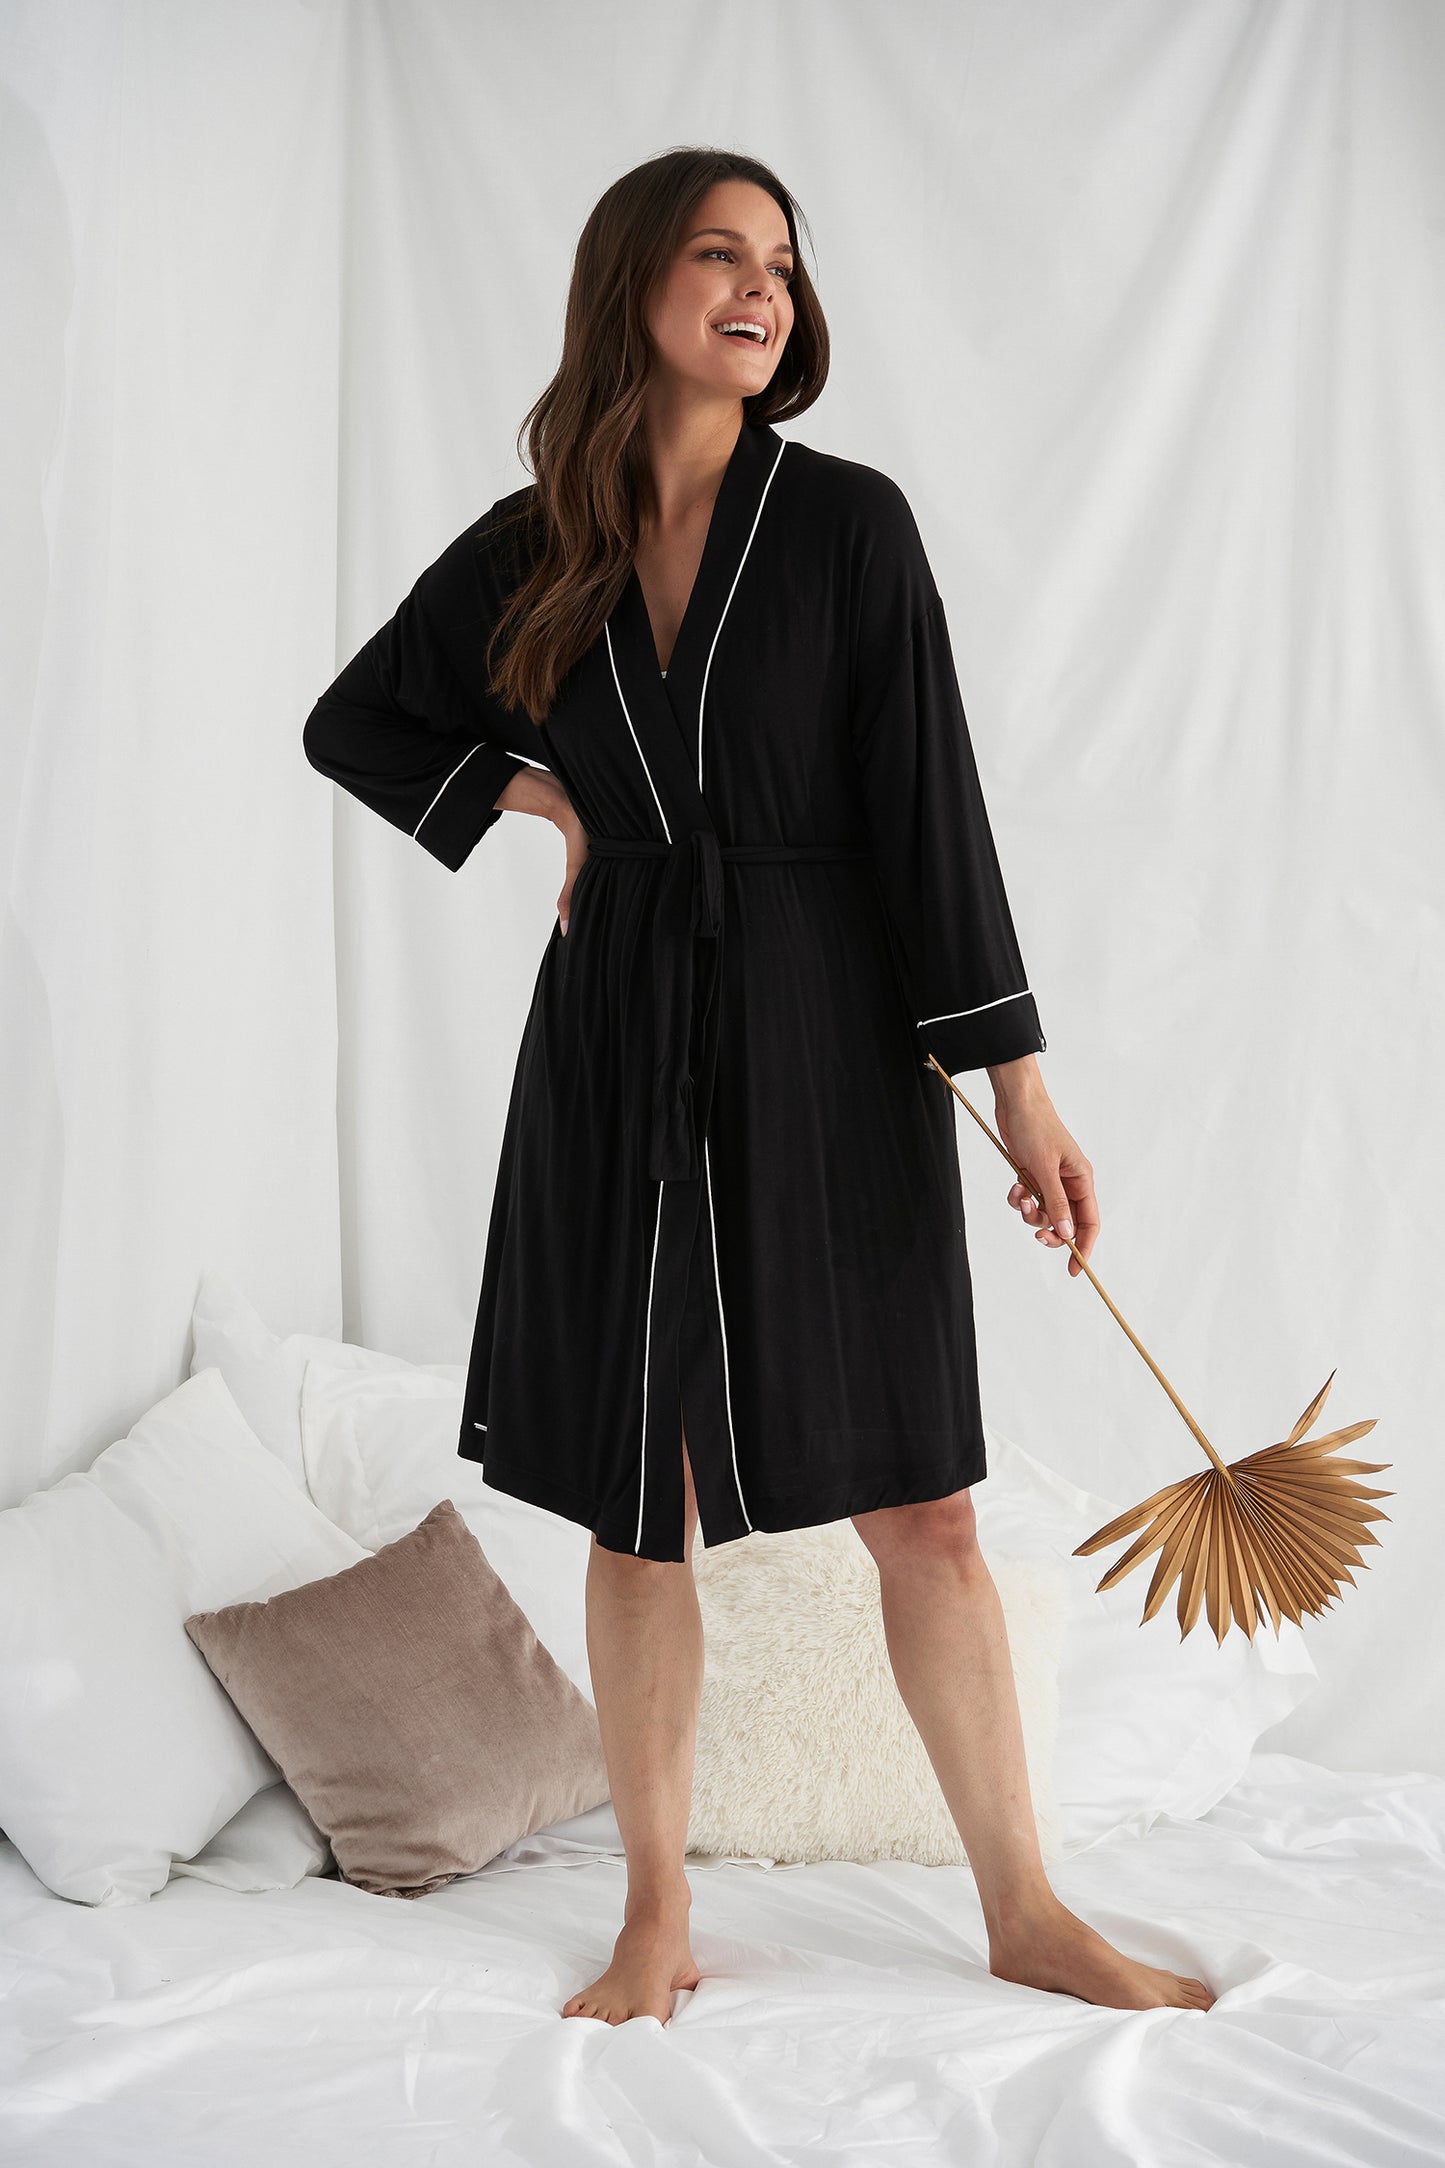 Women's Bamboo Kimono Robe in Black with functional tie and deep pockets from Pretty You London